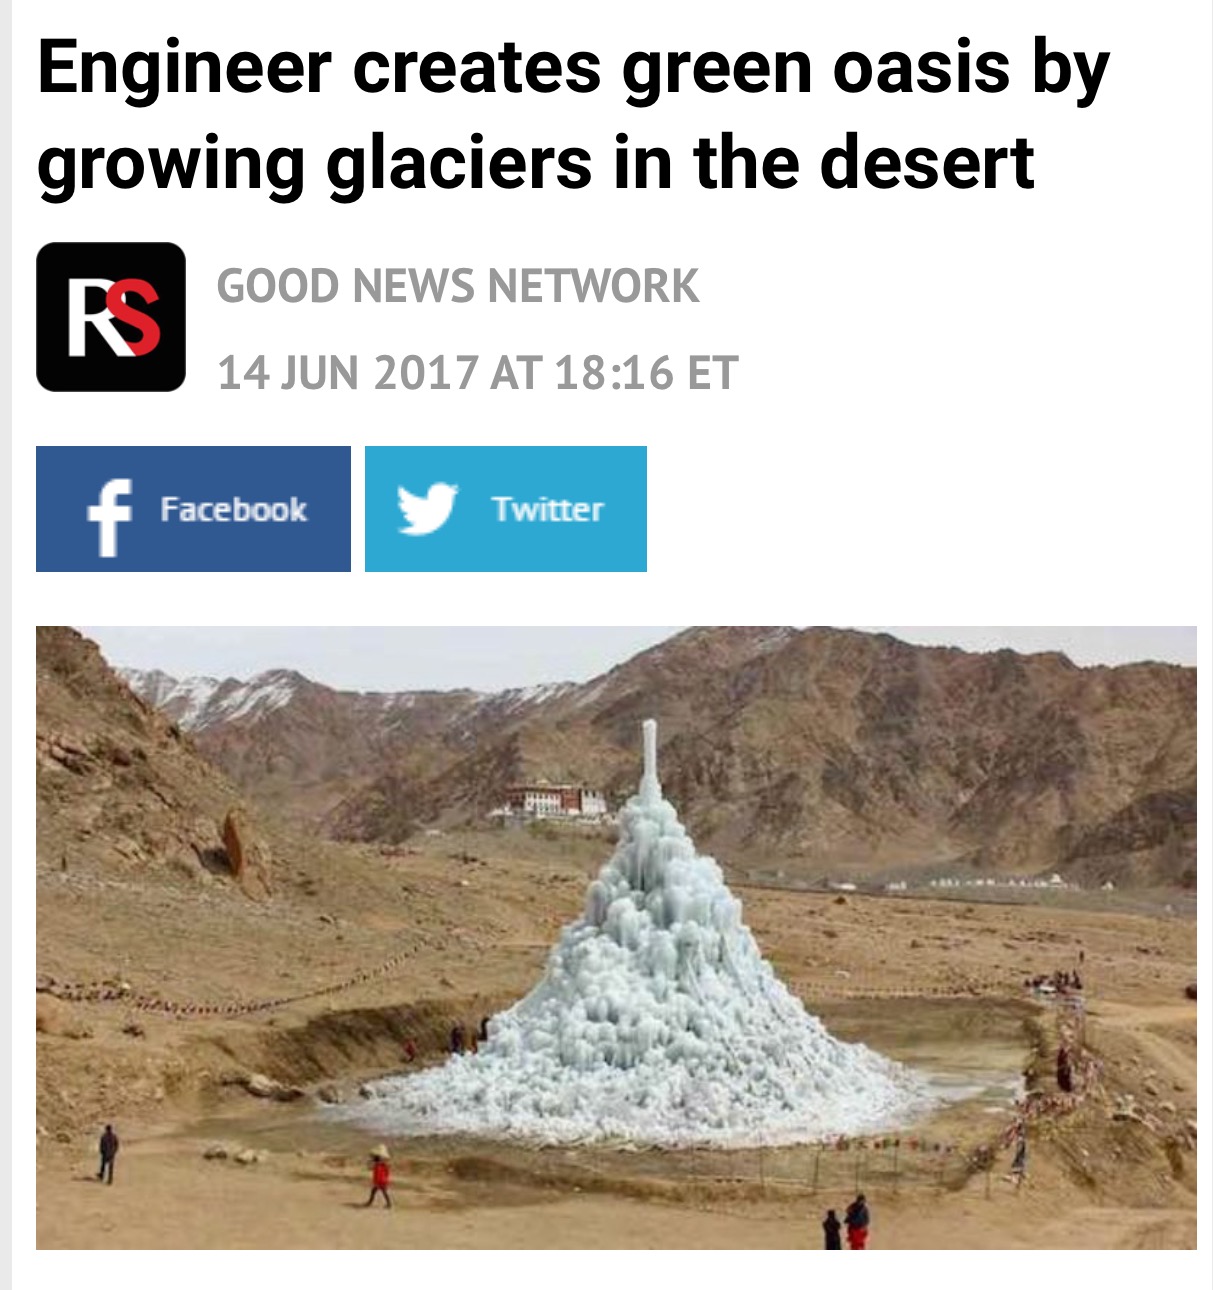 Good News Network of an engineer that created a green oasis in the desert by growing glaciers in the winter to stock up for the dry seasons